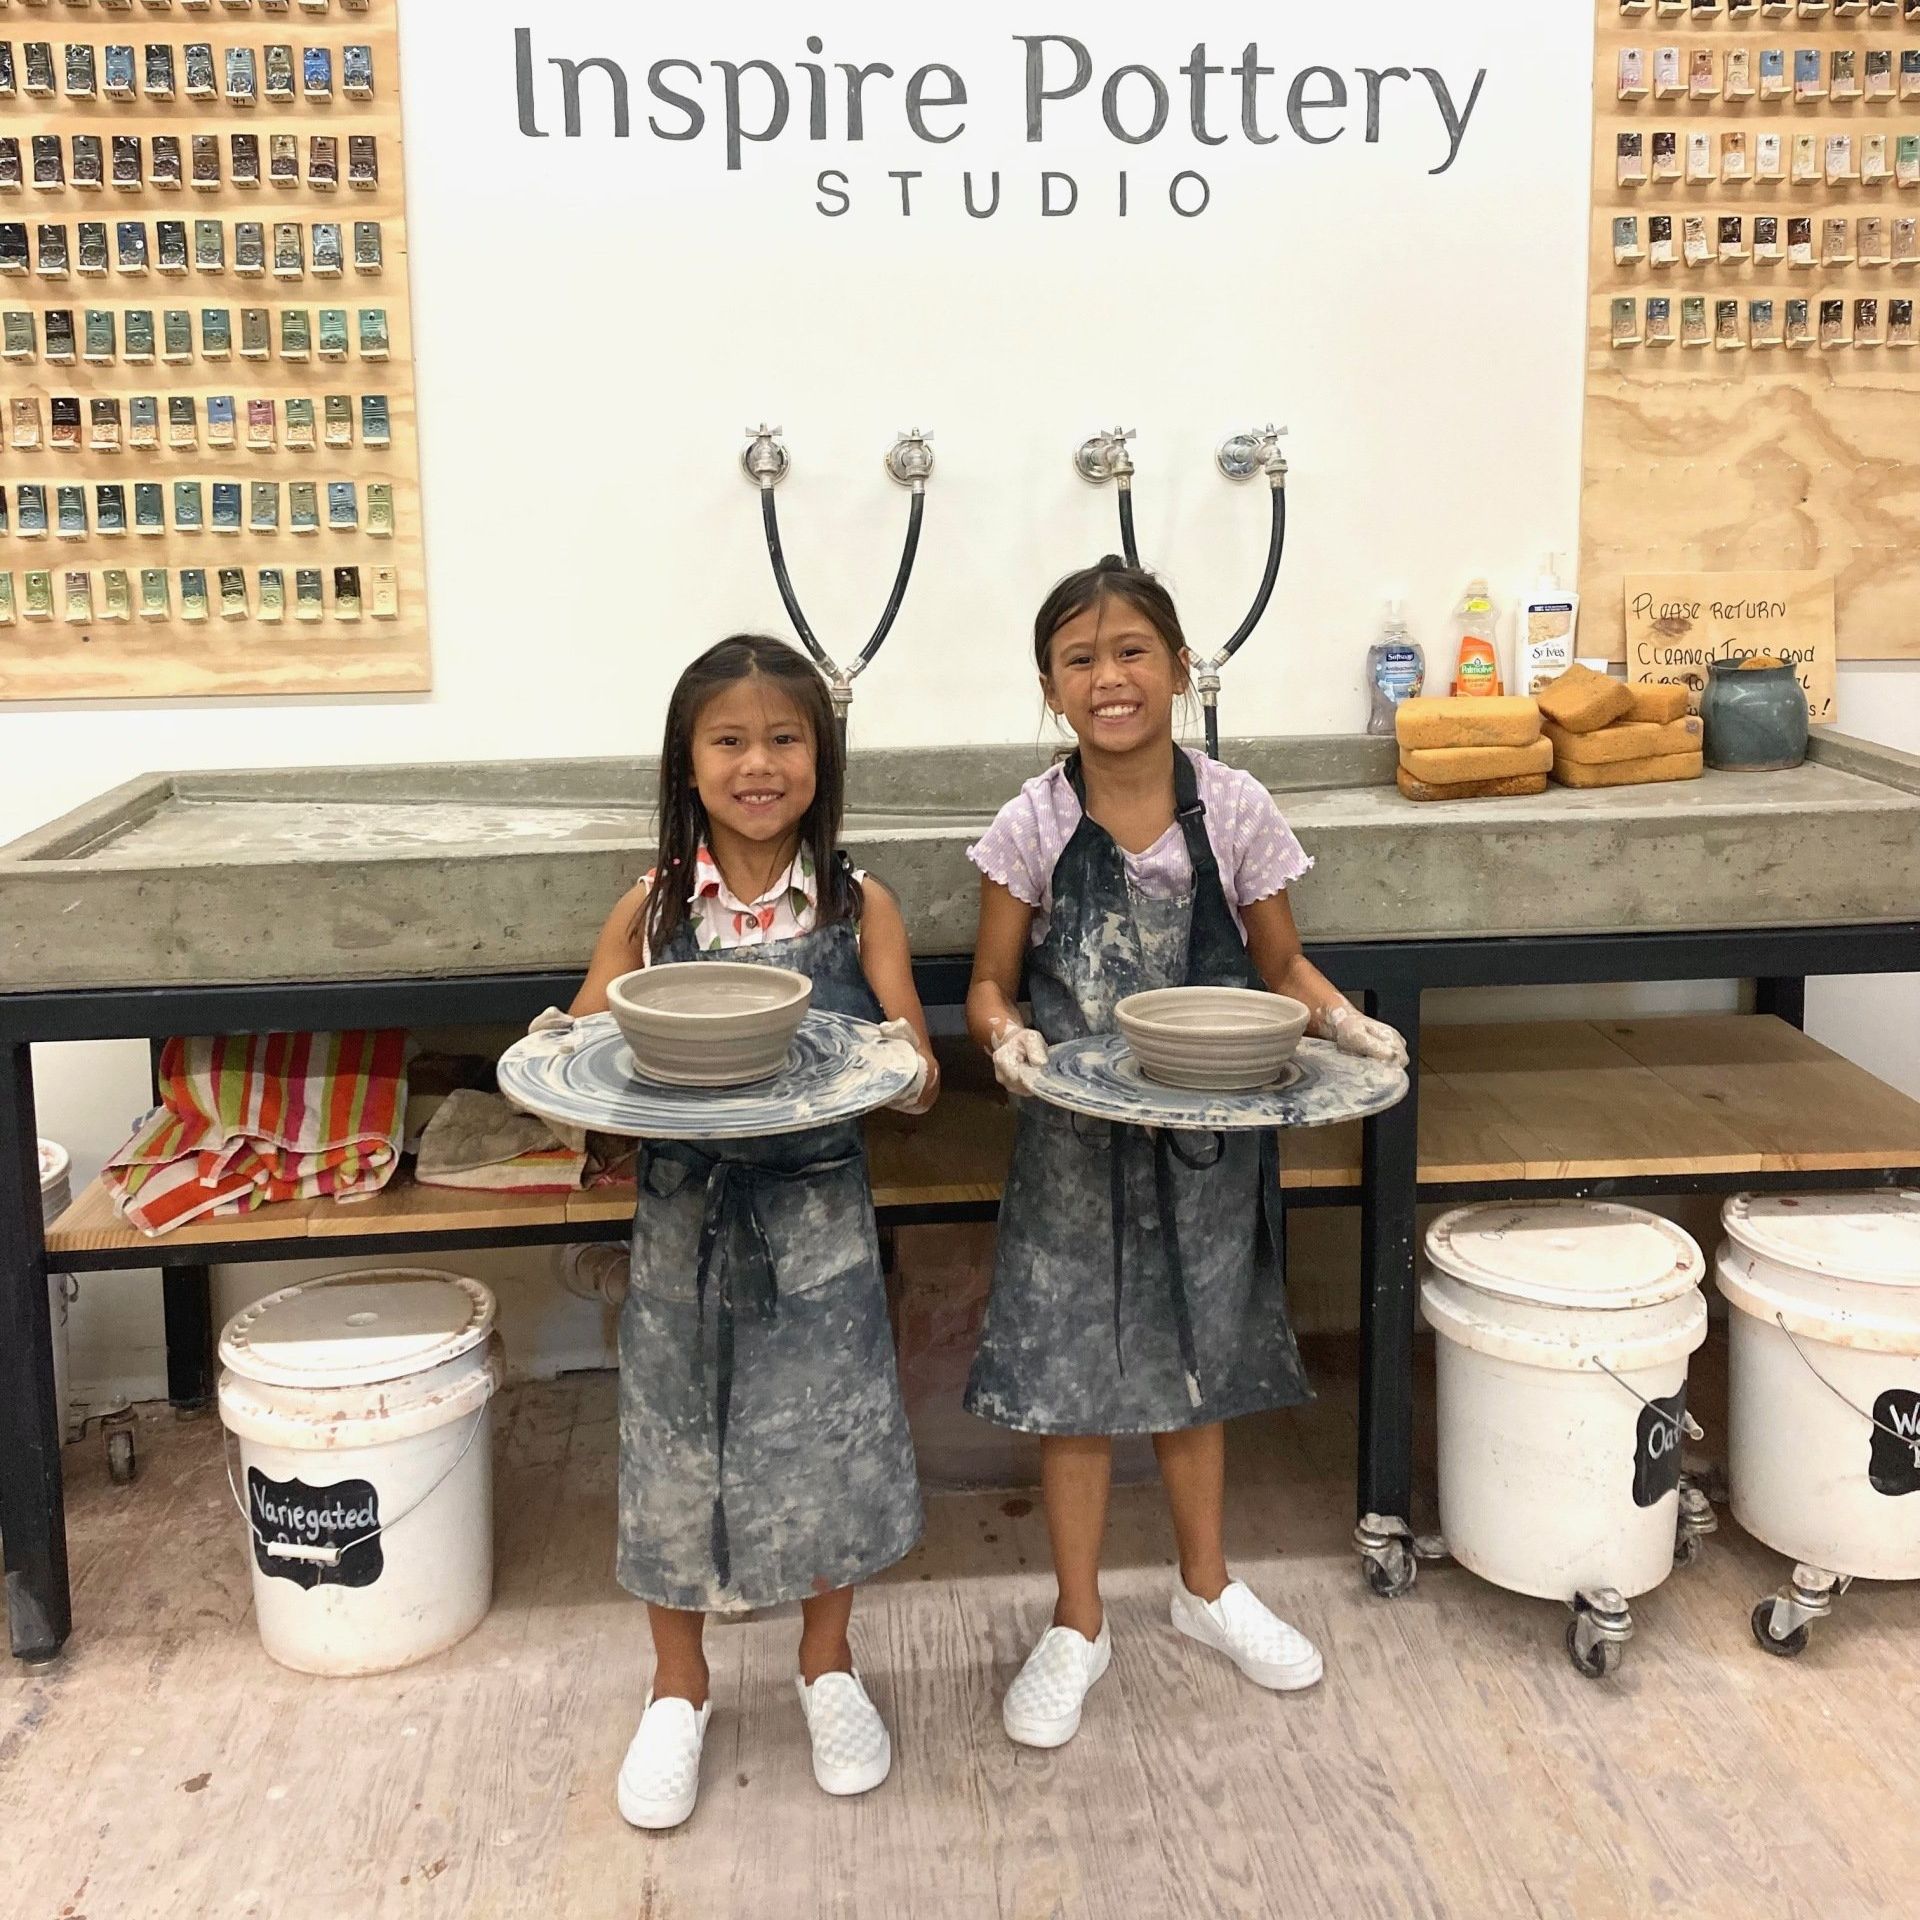 two young girls holding bowls in front of a wall that says inspire pottery studio